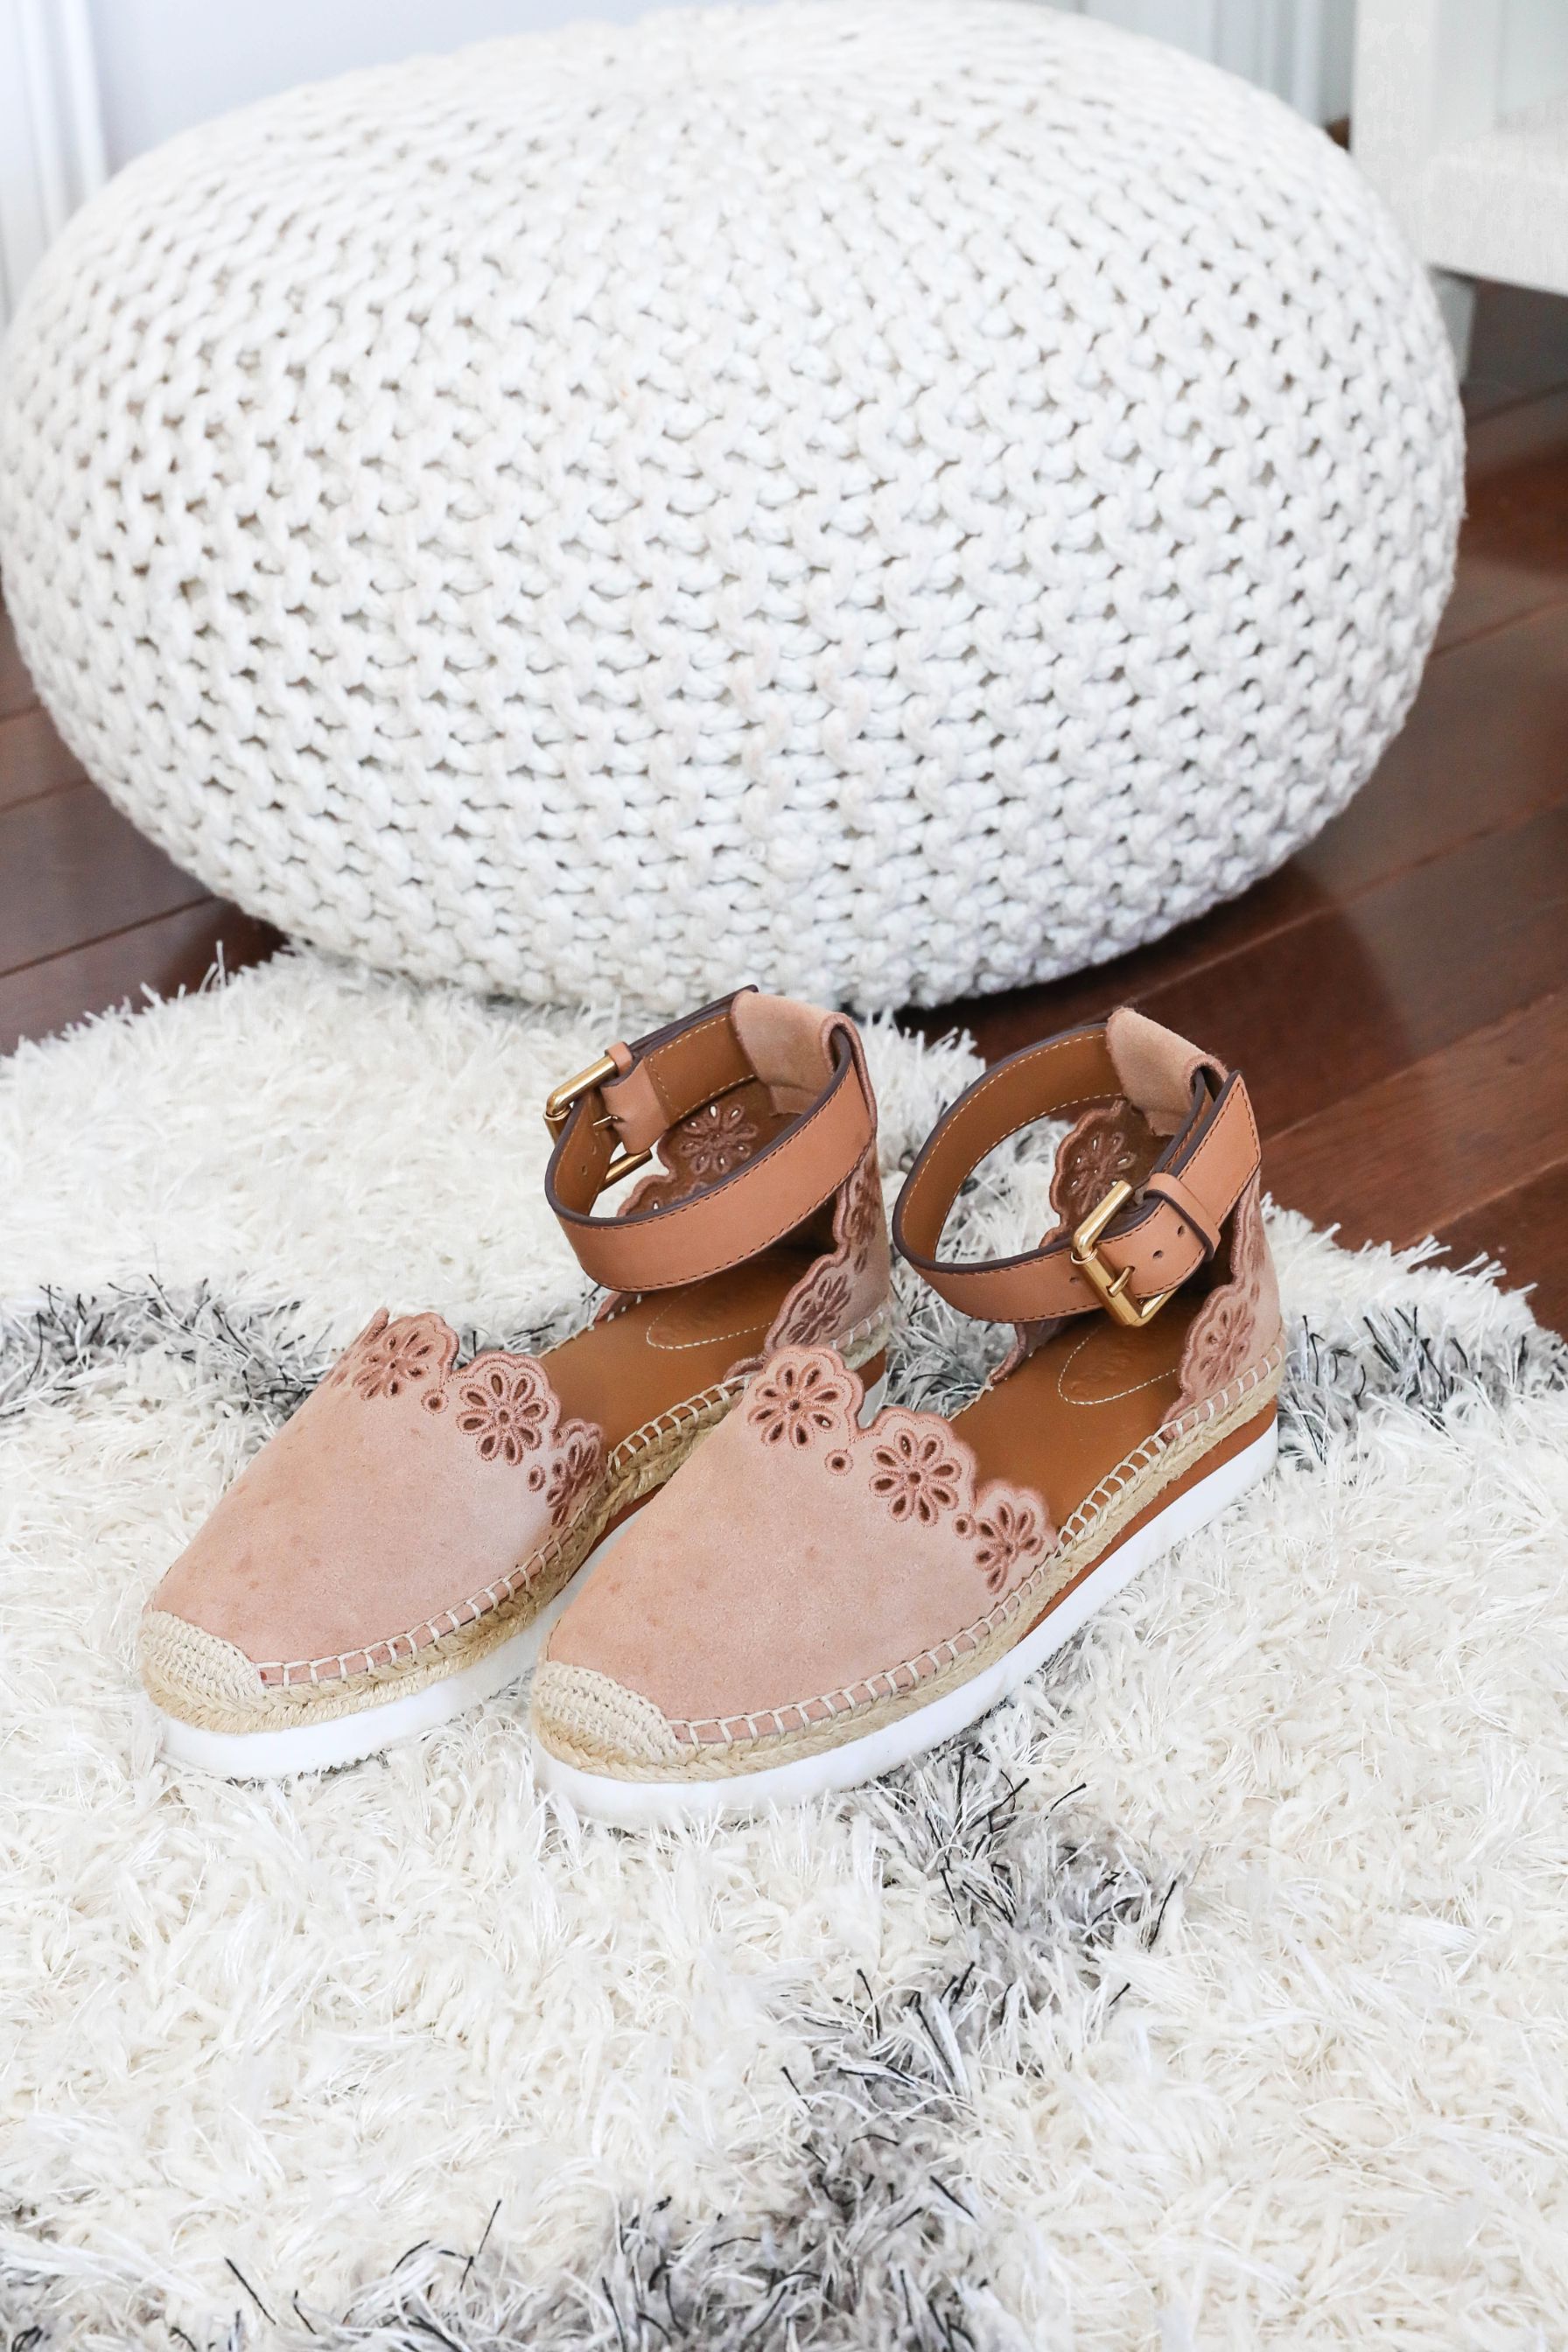 Espadrille spring shoes roundup! The cutest wedges and sandals on fashion blog daily dose of charm by lauren lindmark